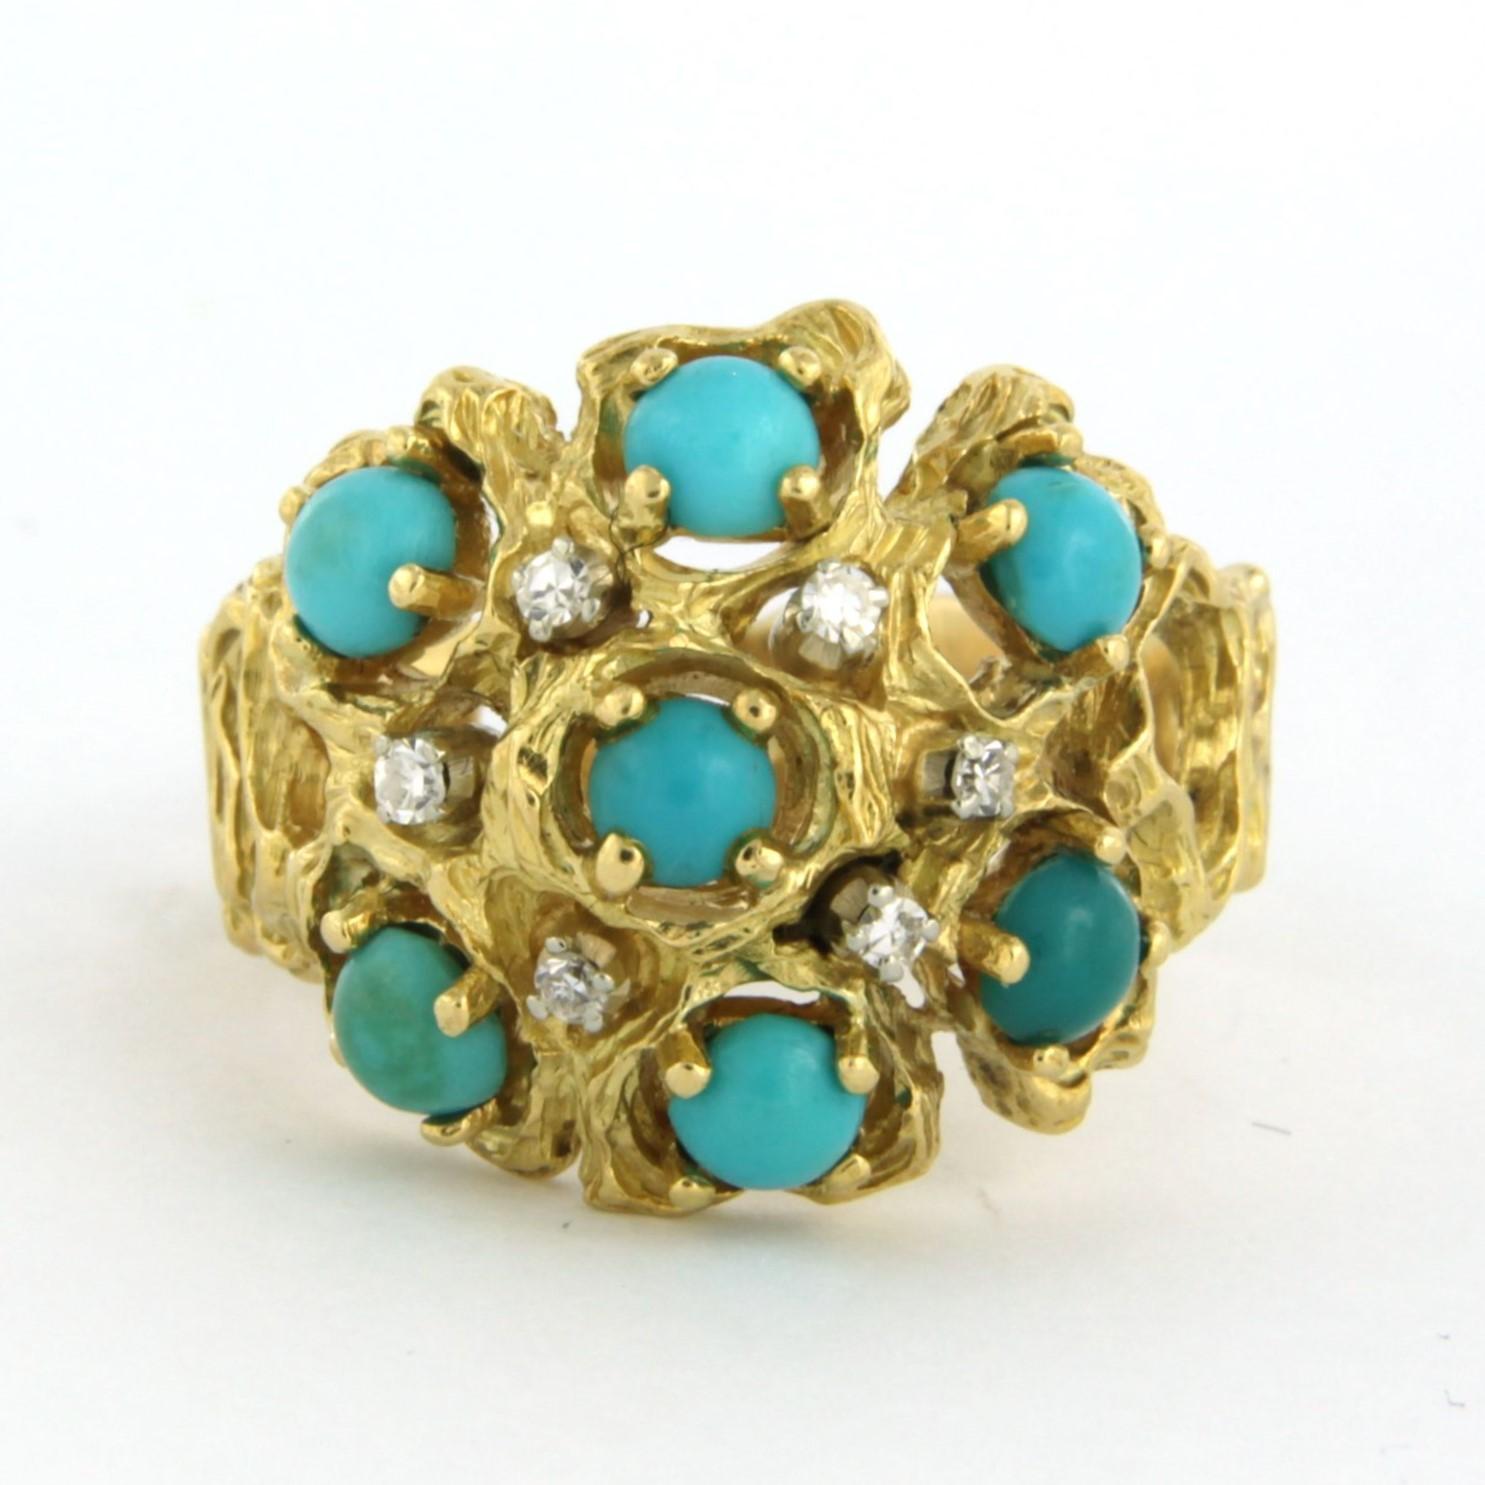 18 kt bicolour gold ring set with turquoise and single cut diamonds. F/G - US/SI - ring size U.S. 12 - EU. 21.5(65)

top of the ring is 1.9 cm wide by 7.0 mm high

weight 13.0 grams

ring size U.S. 12 - EU. 21.5(65)

put with

- 7 x 3.8 mm round